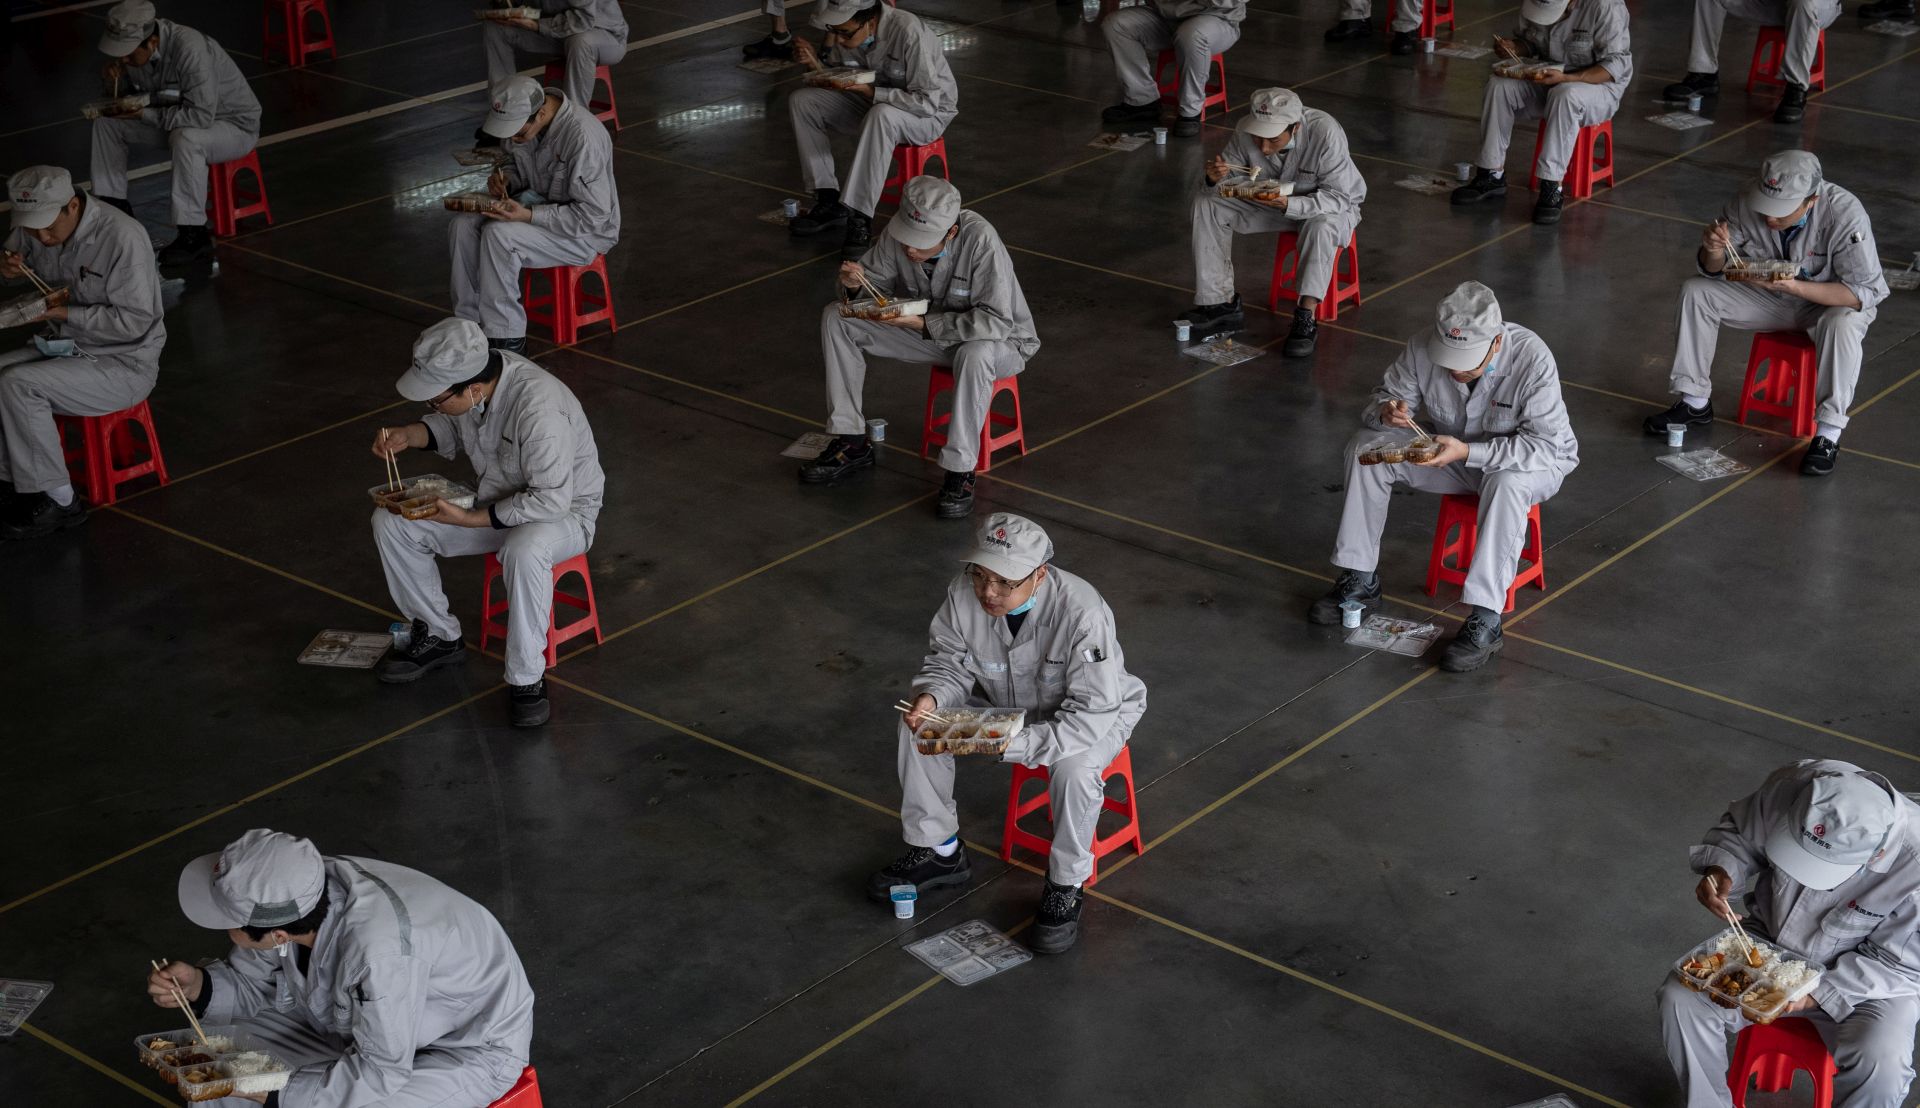 epa08317268 Workers have lunch while sitting 1.5 meters away from others at the joint-venture Dongfeng Honda in Wuhan, Hubei province, China, 23 March 2020 (issued 24 March 2020). The automaker says 95 percent of its labor force has returned to their posts after the long COVID-19 break.  EPA/Yi Xin CHINA OUT